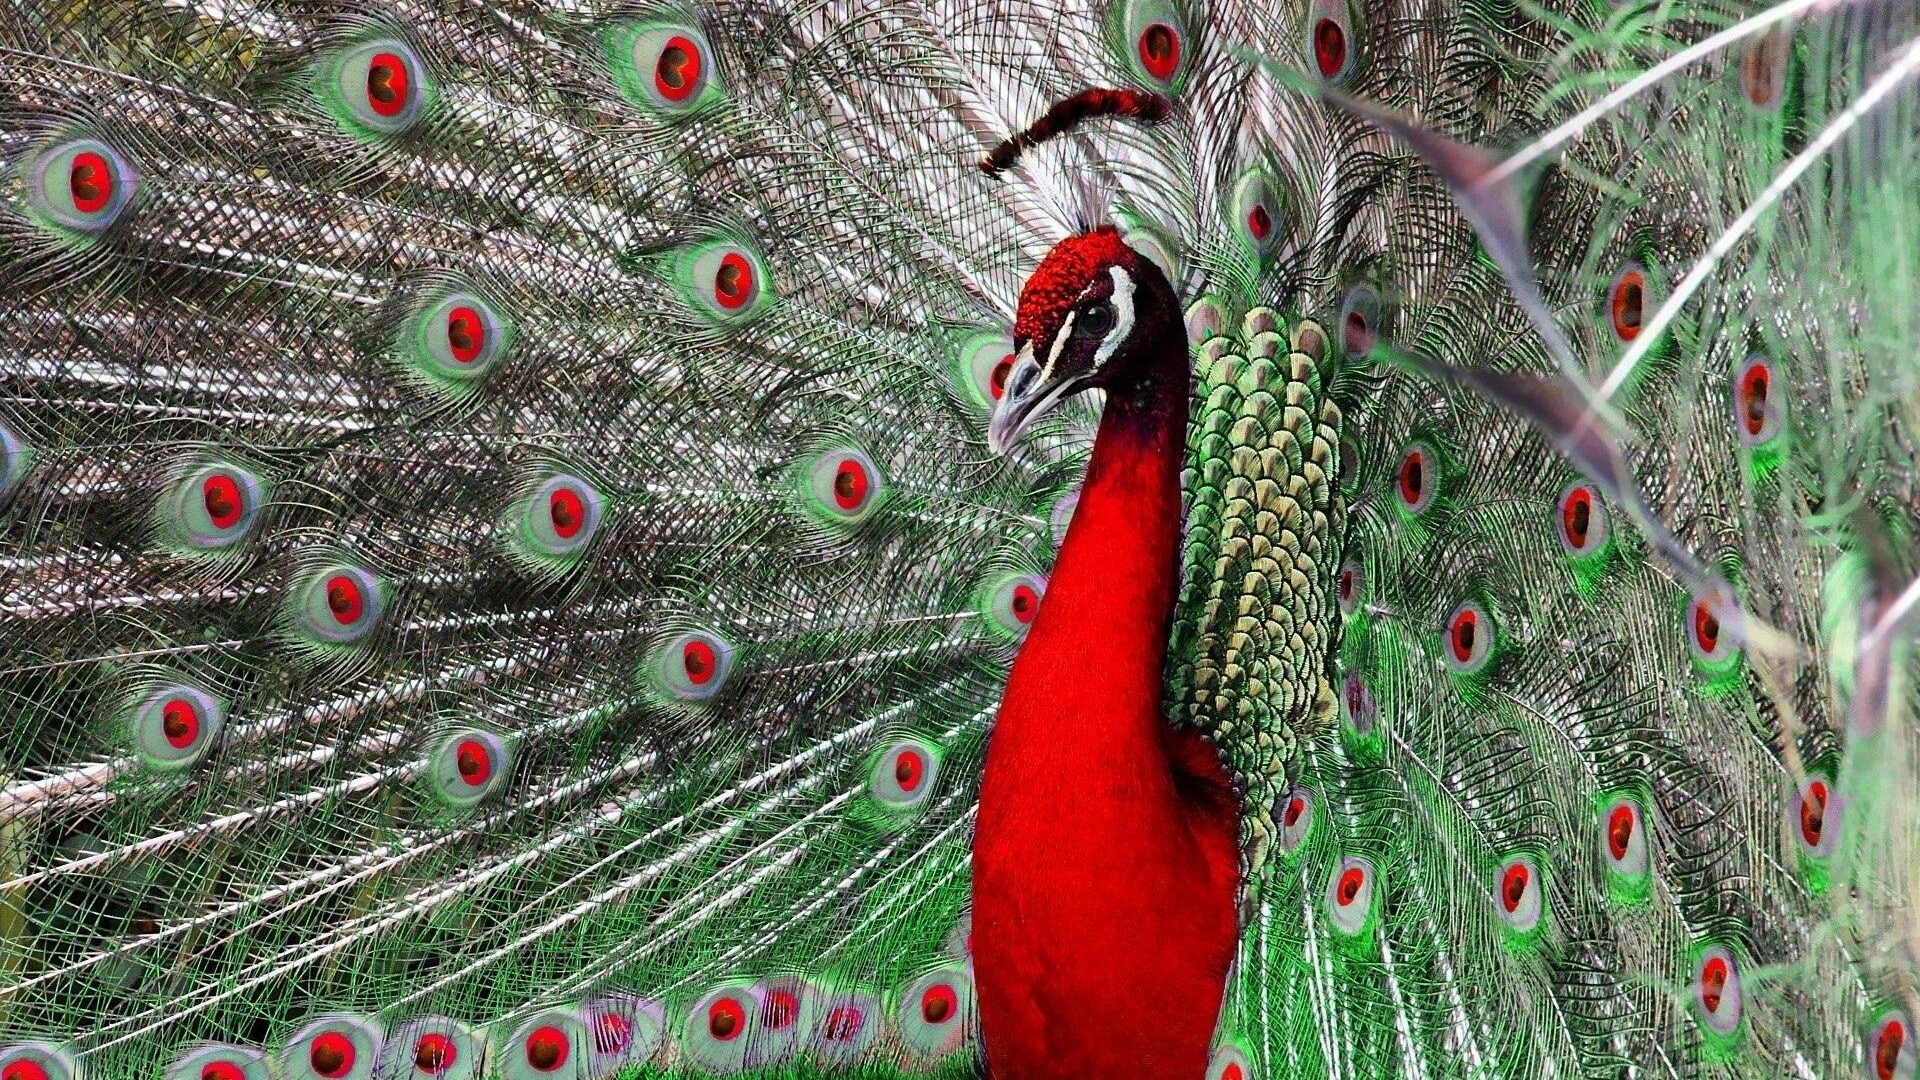 Peacock: The fan-shaped crest on the head is made of feathers with bare black shafts and tipped with bluish-green webbing. 1920x1080 Full HD Background.